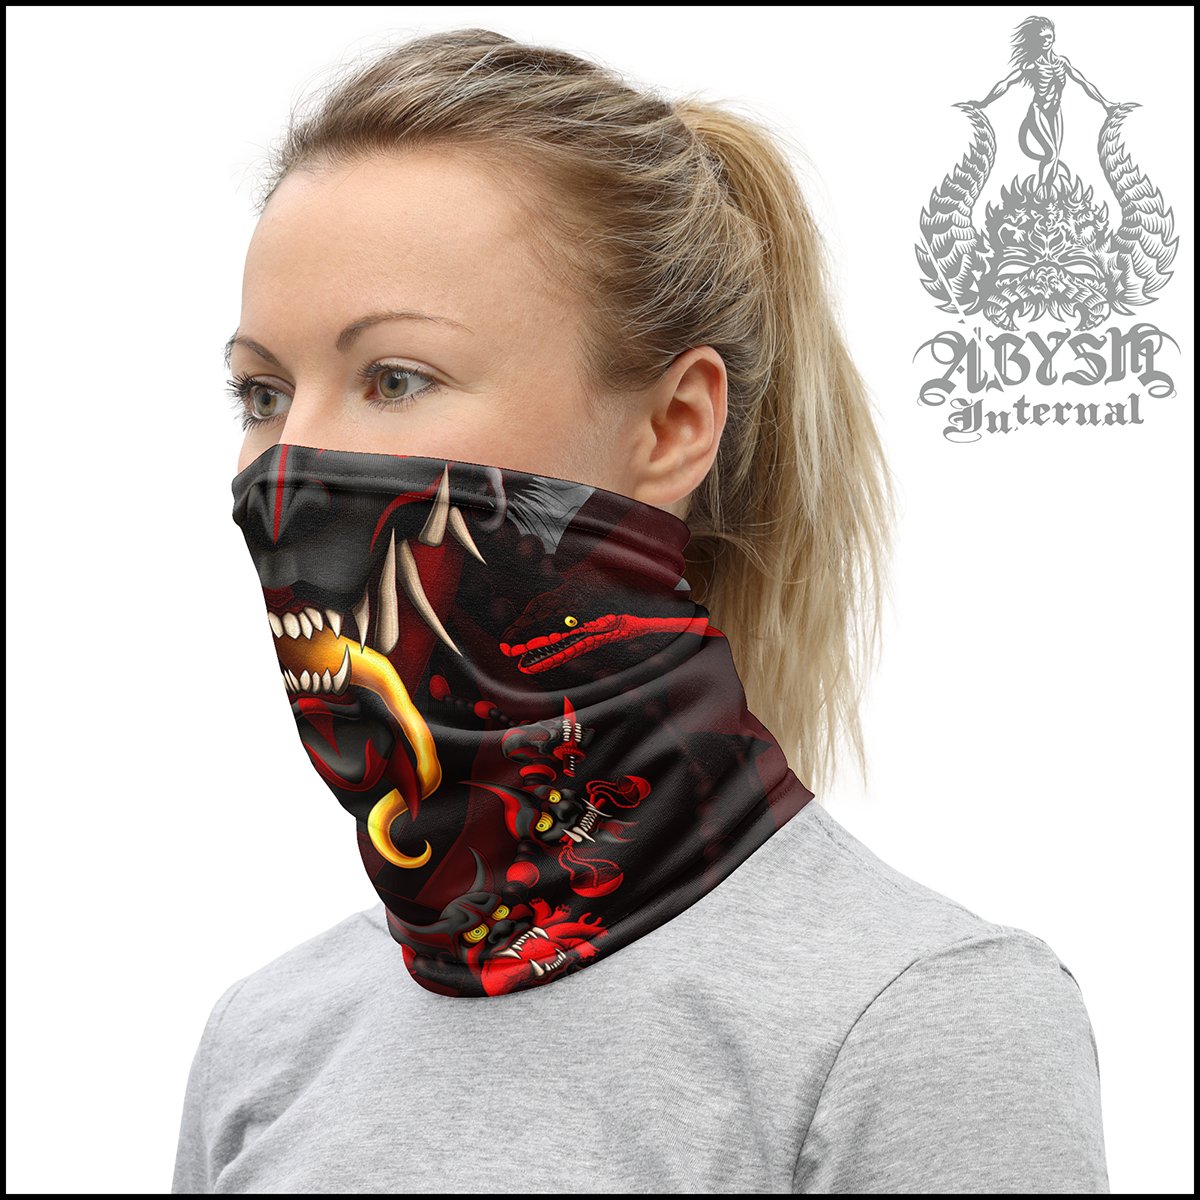 Hannya Neck Gaiter, Demon Face Mask, Japanese Oni Printed Head Covering, Gothic Street Outfit, Snake, Fangs, Headband - Black Red - Abysm Internal